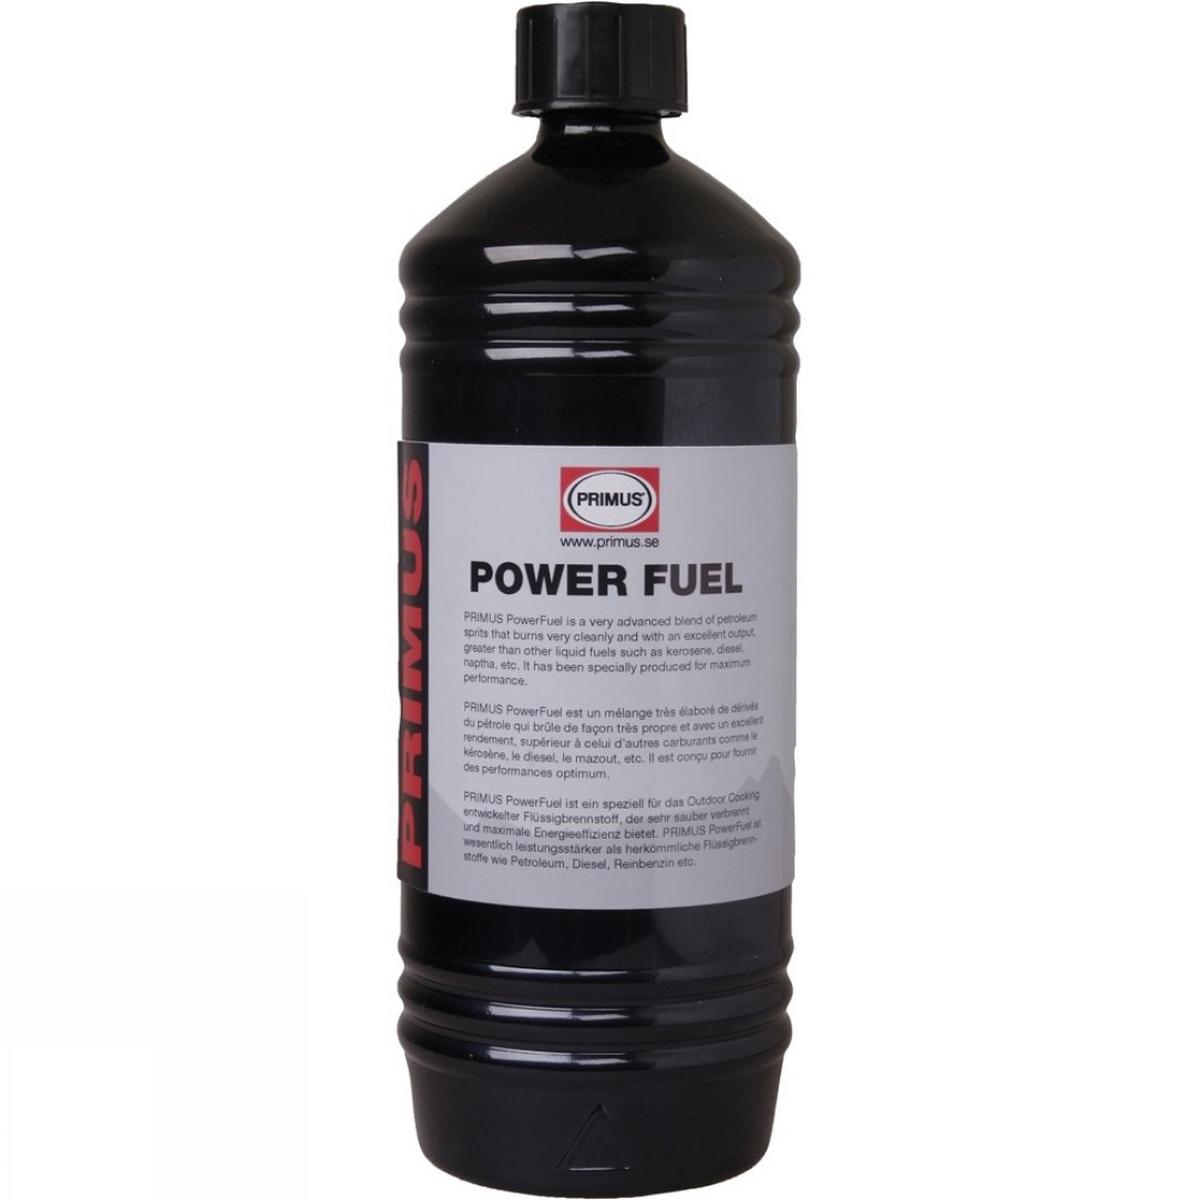 Primus PowerFuel 1L - AVAILABLE IN-STORE ONLY